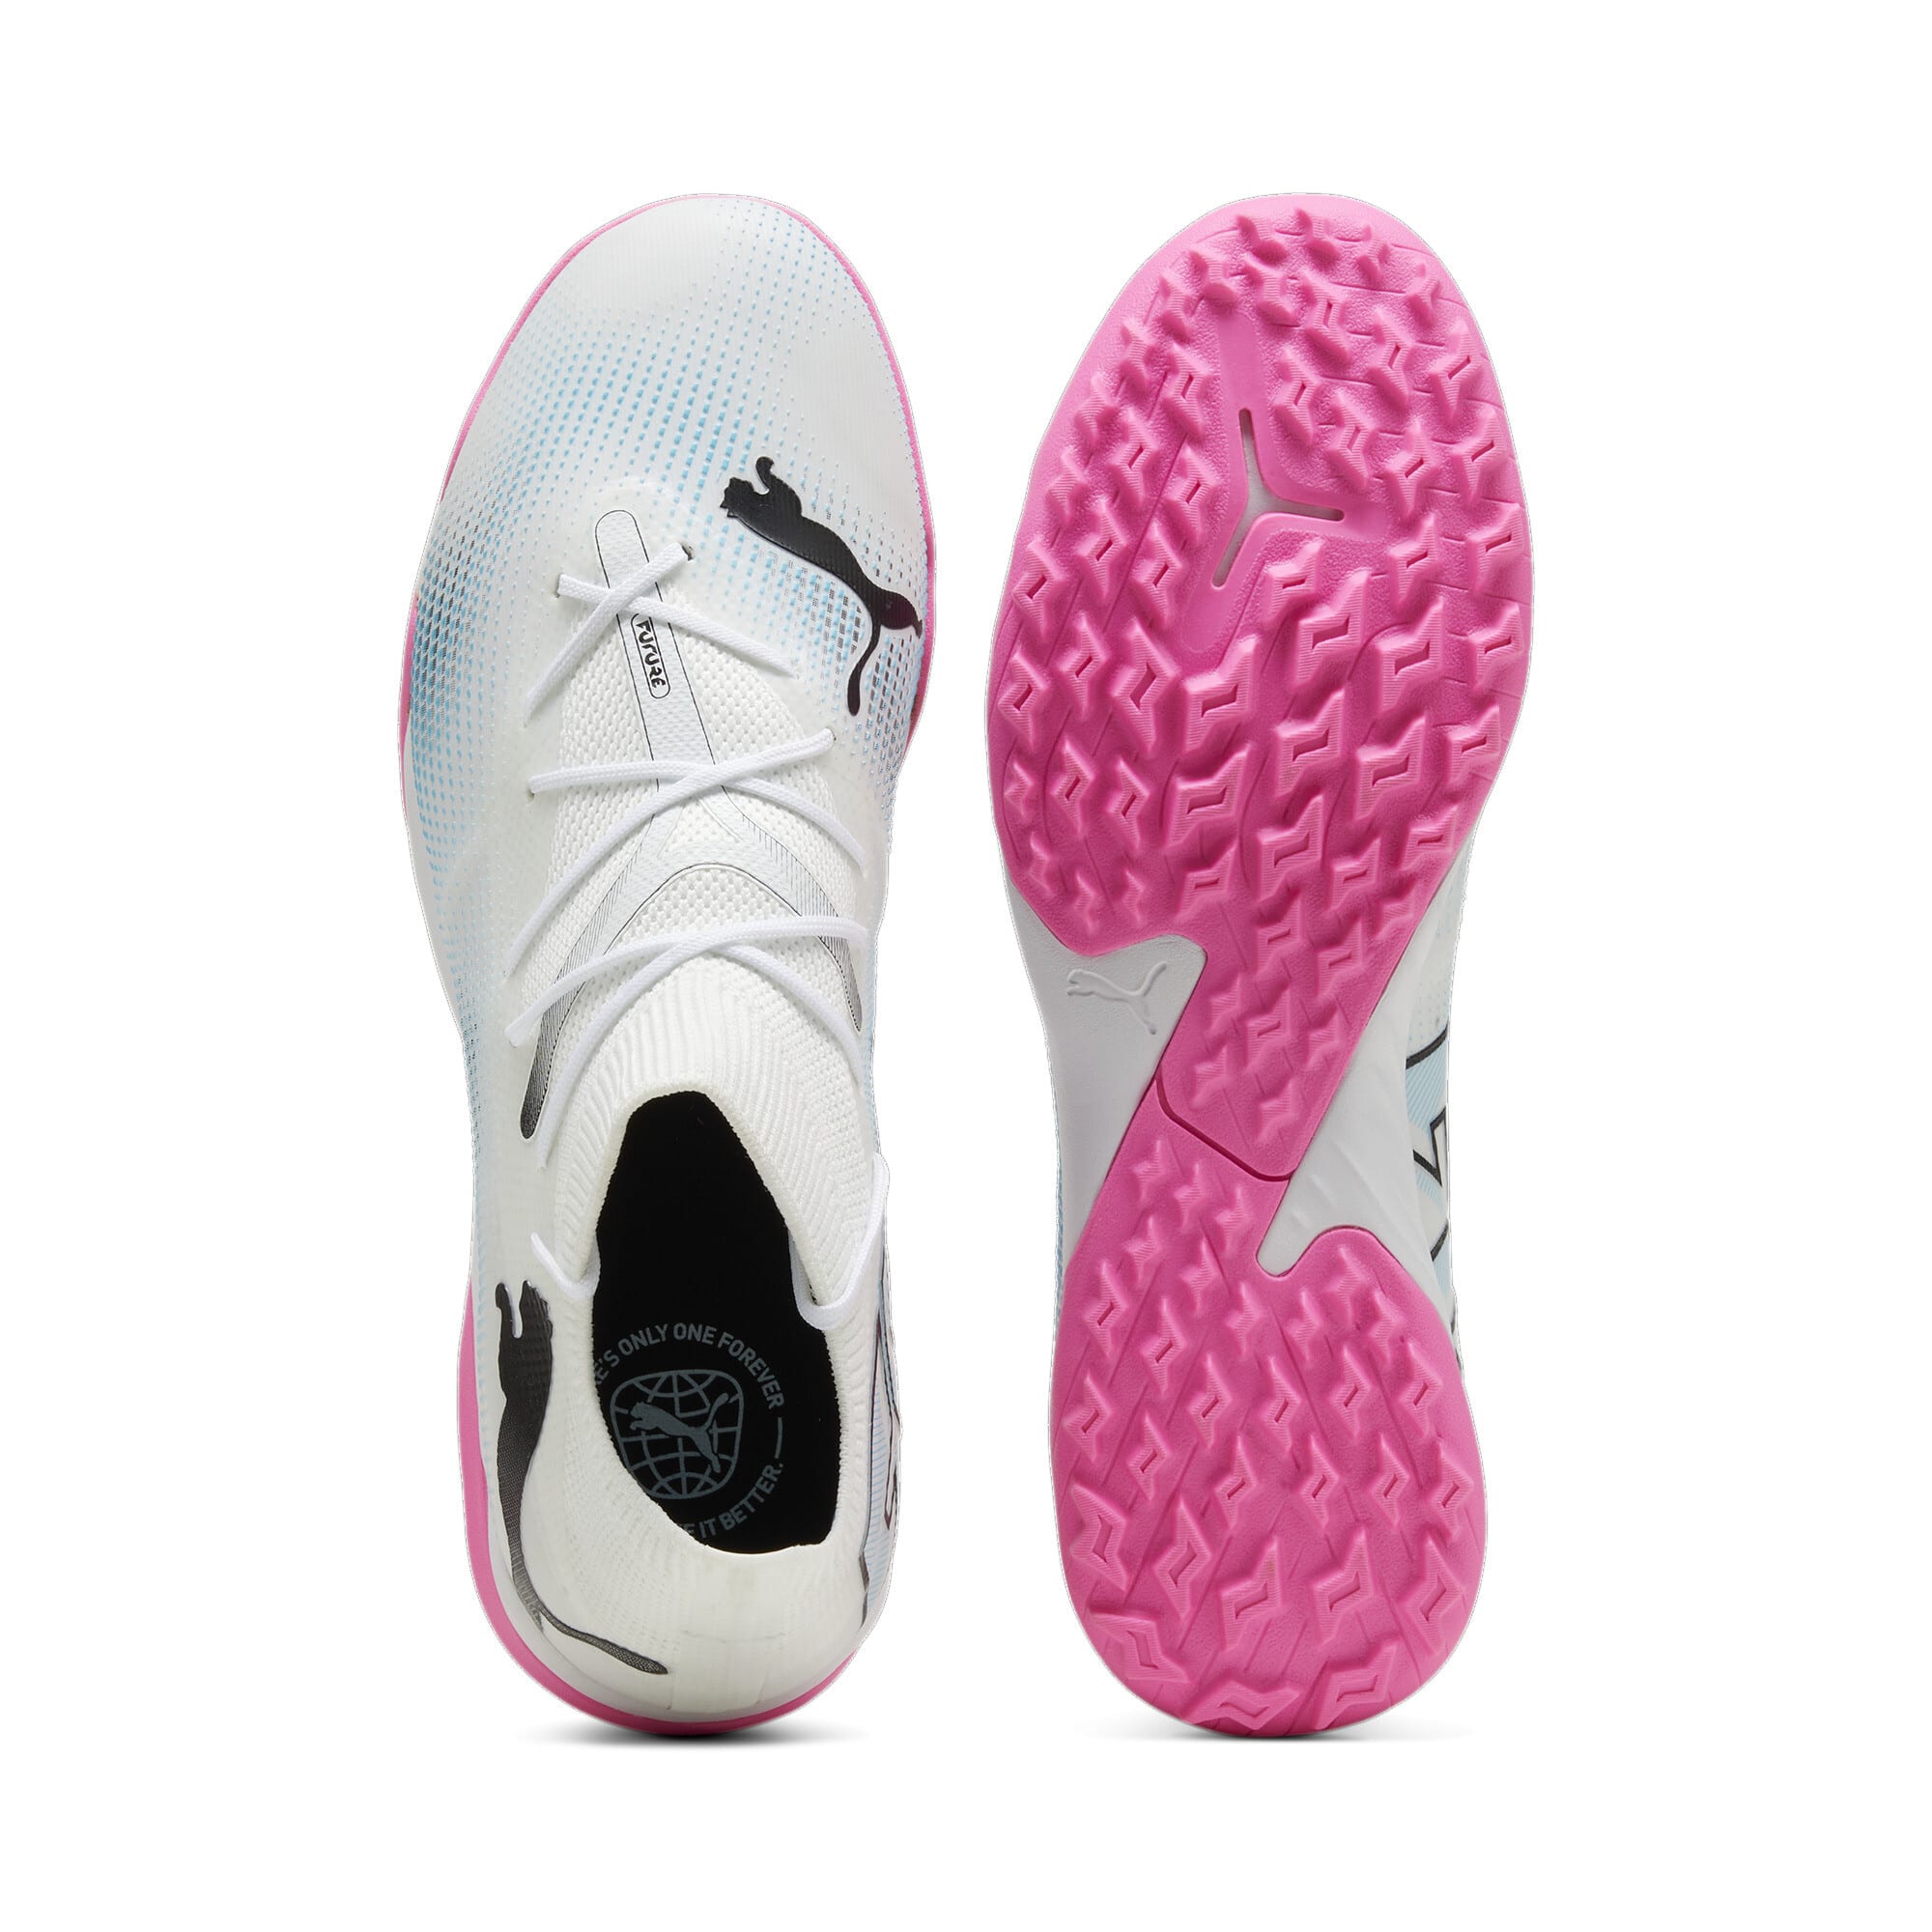 Puma St Runner v3 Nl W 384857 12 shoes white pink - KeeShoes